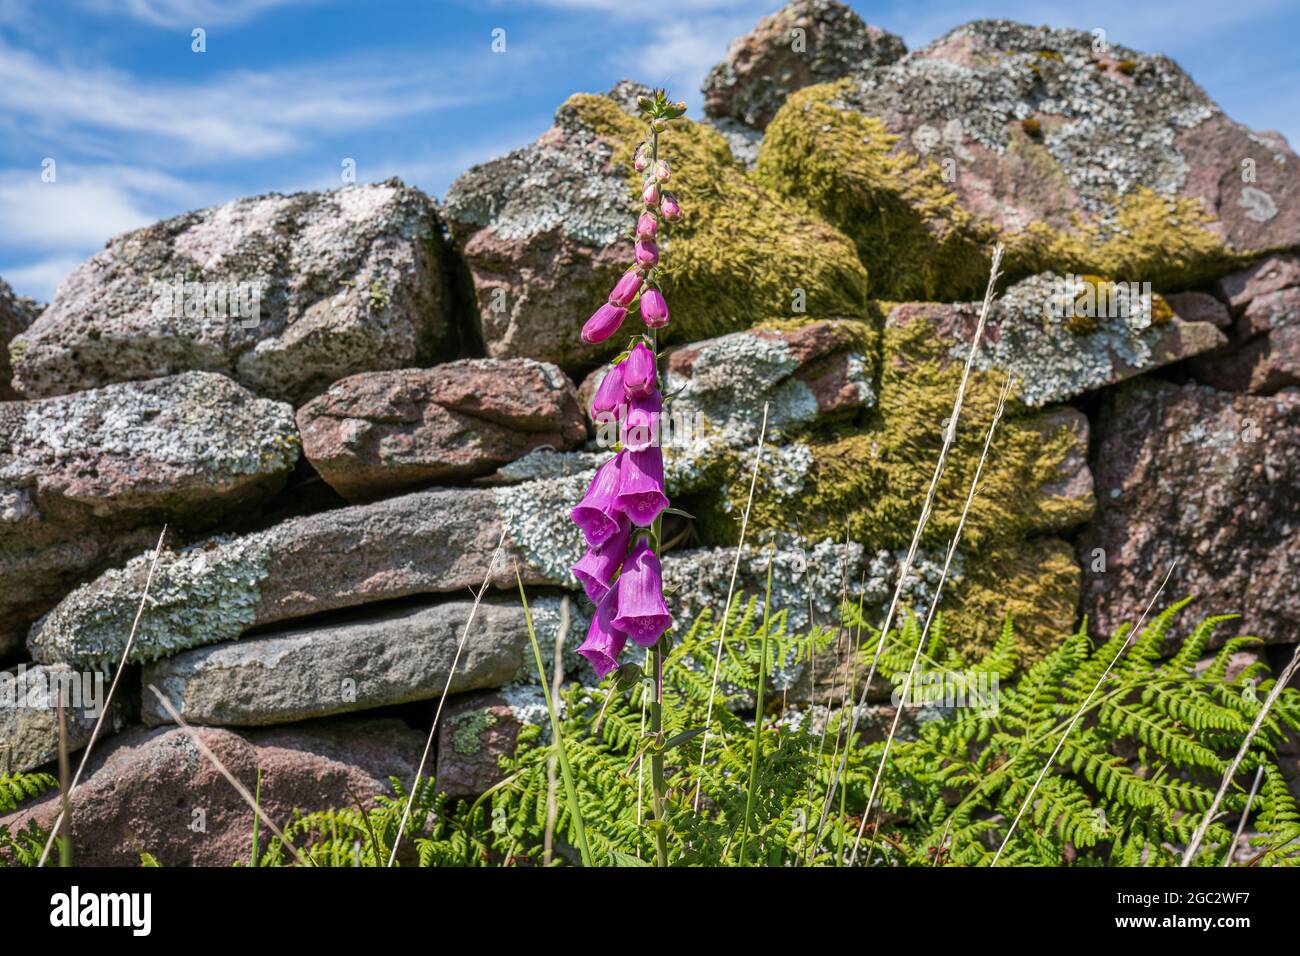 Single wild purple foxglove or Digitalis purpurea, Lady's glove and fern with old mossy stone wall background in South Wales, UK. British plants. Stock Photo